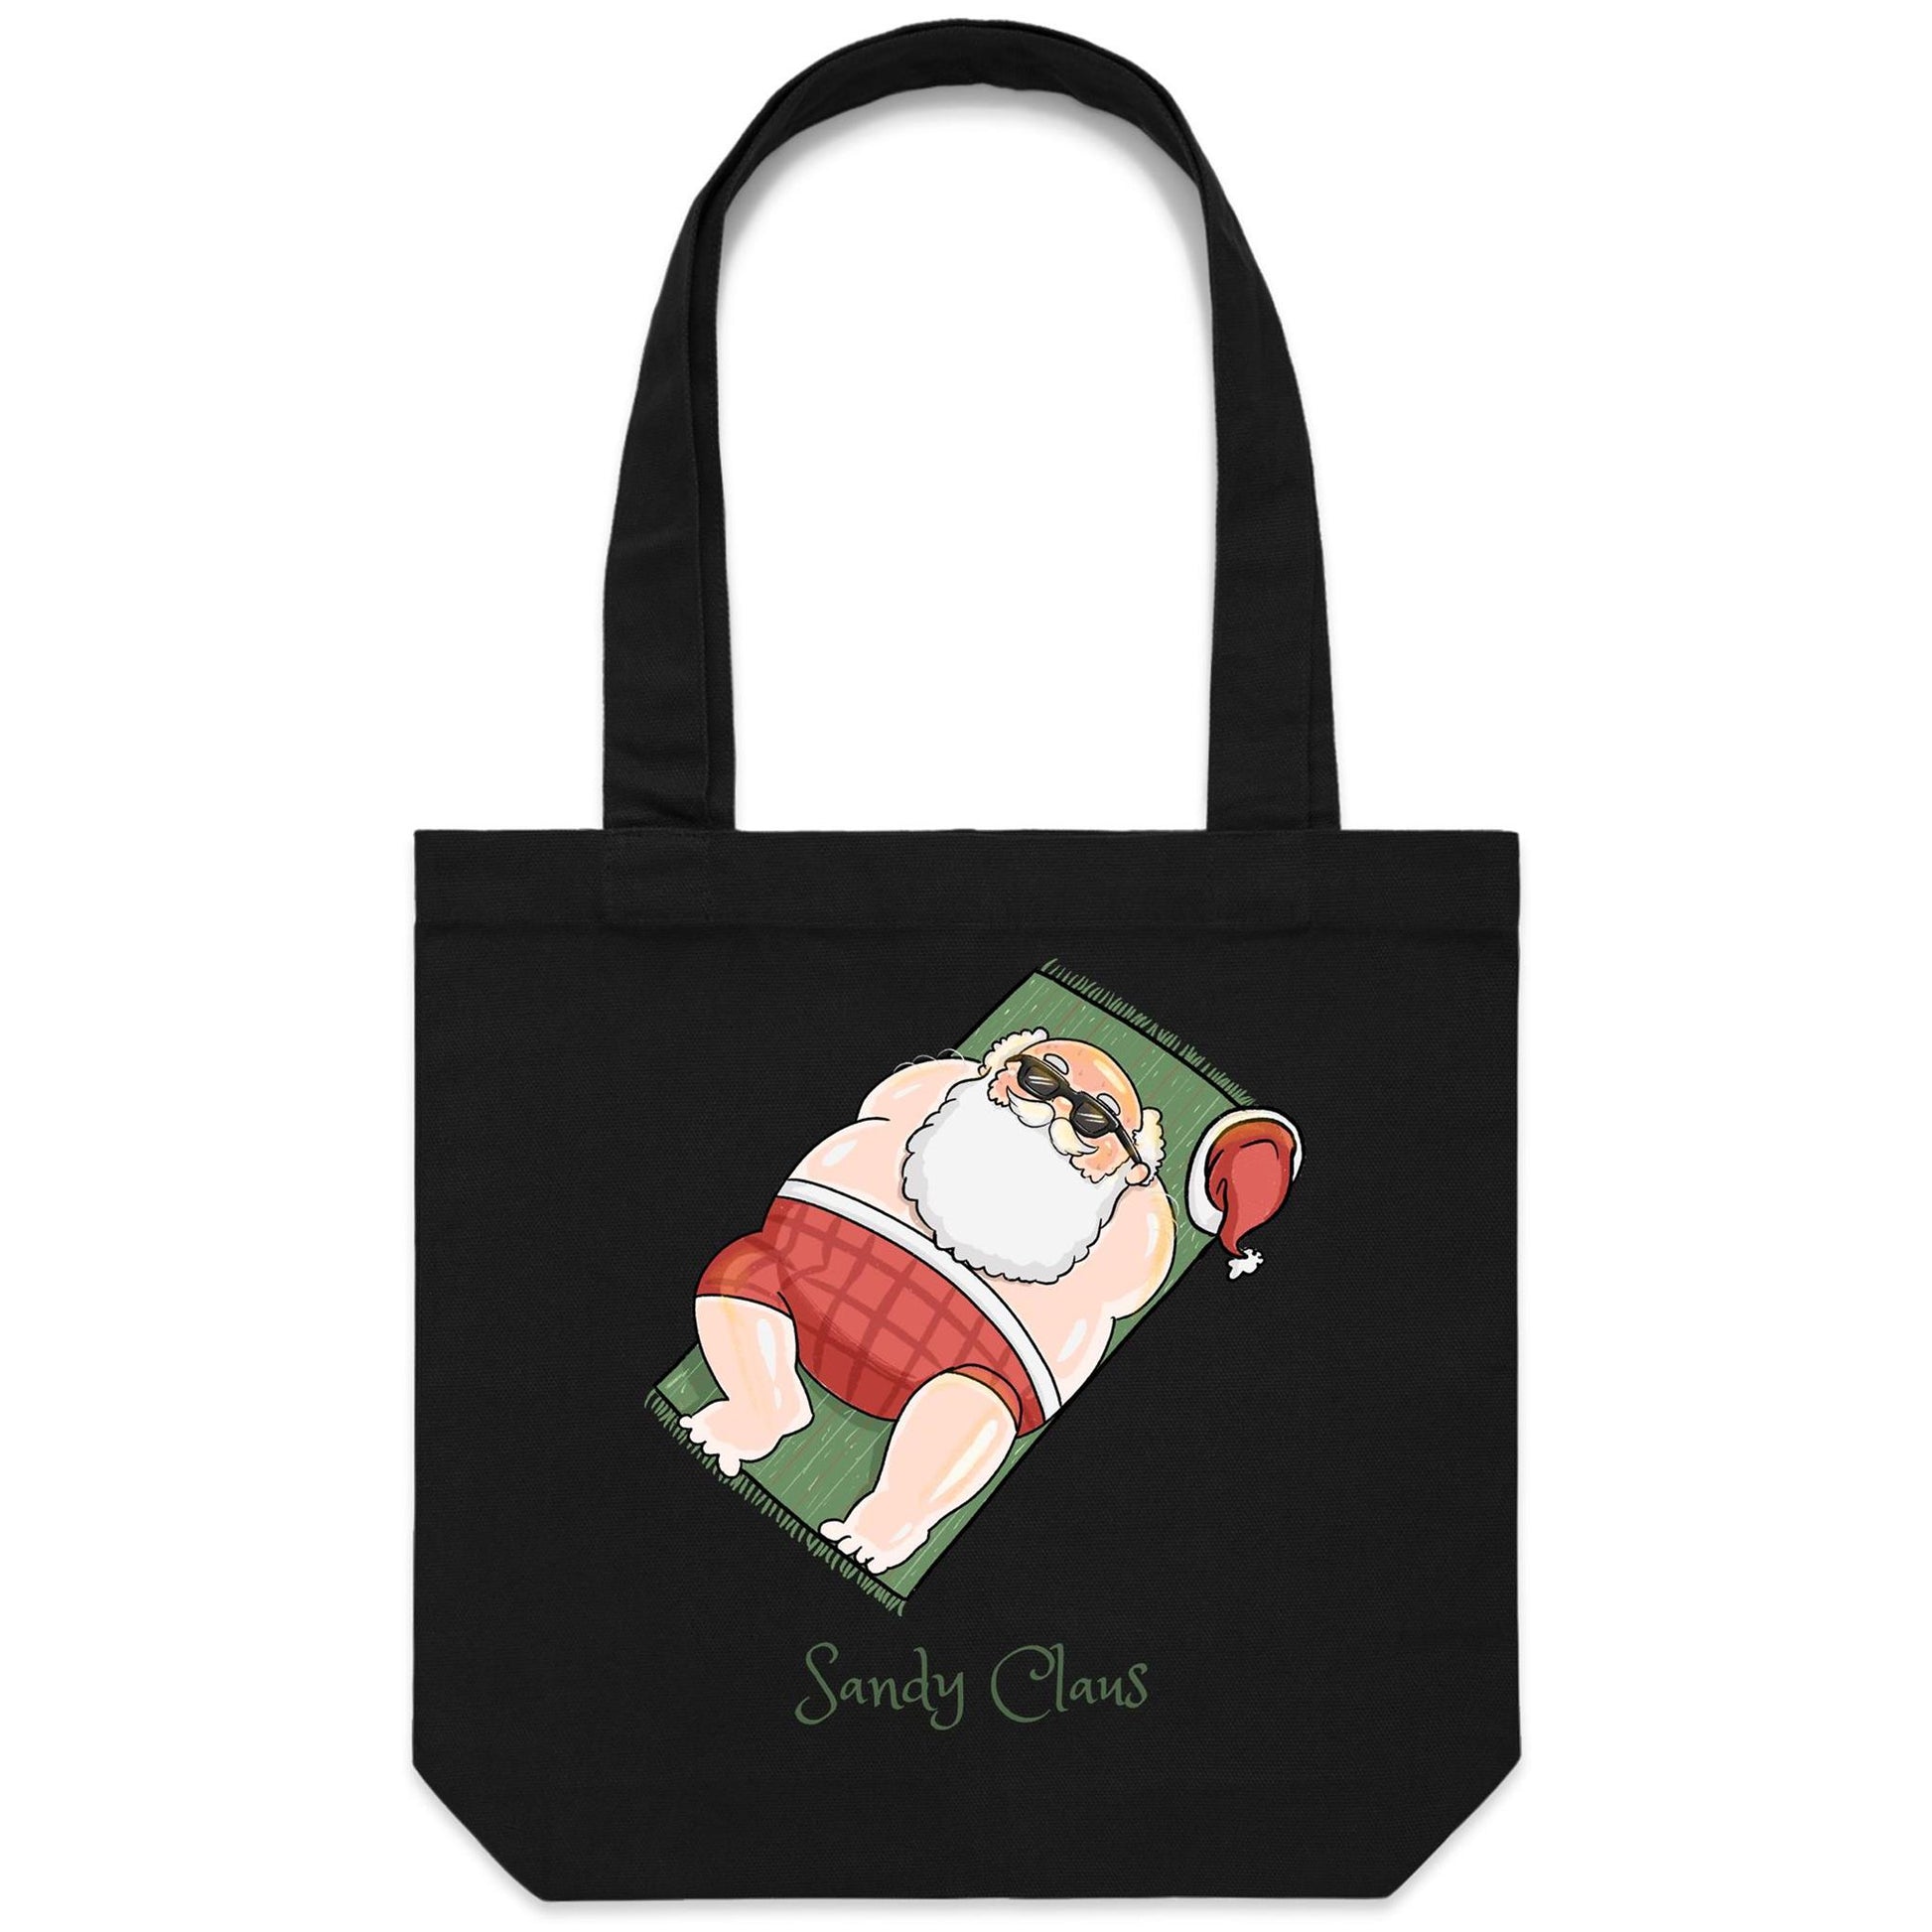 Sandy Claus - Canvas Tote Bag Black One Size Christmas Tote Bag Merry Christmas